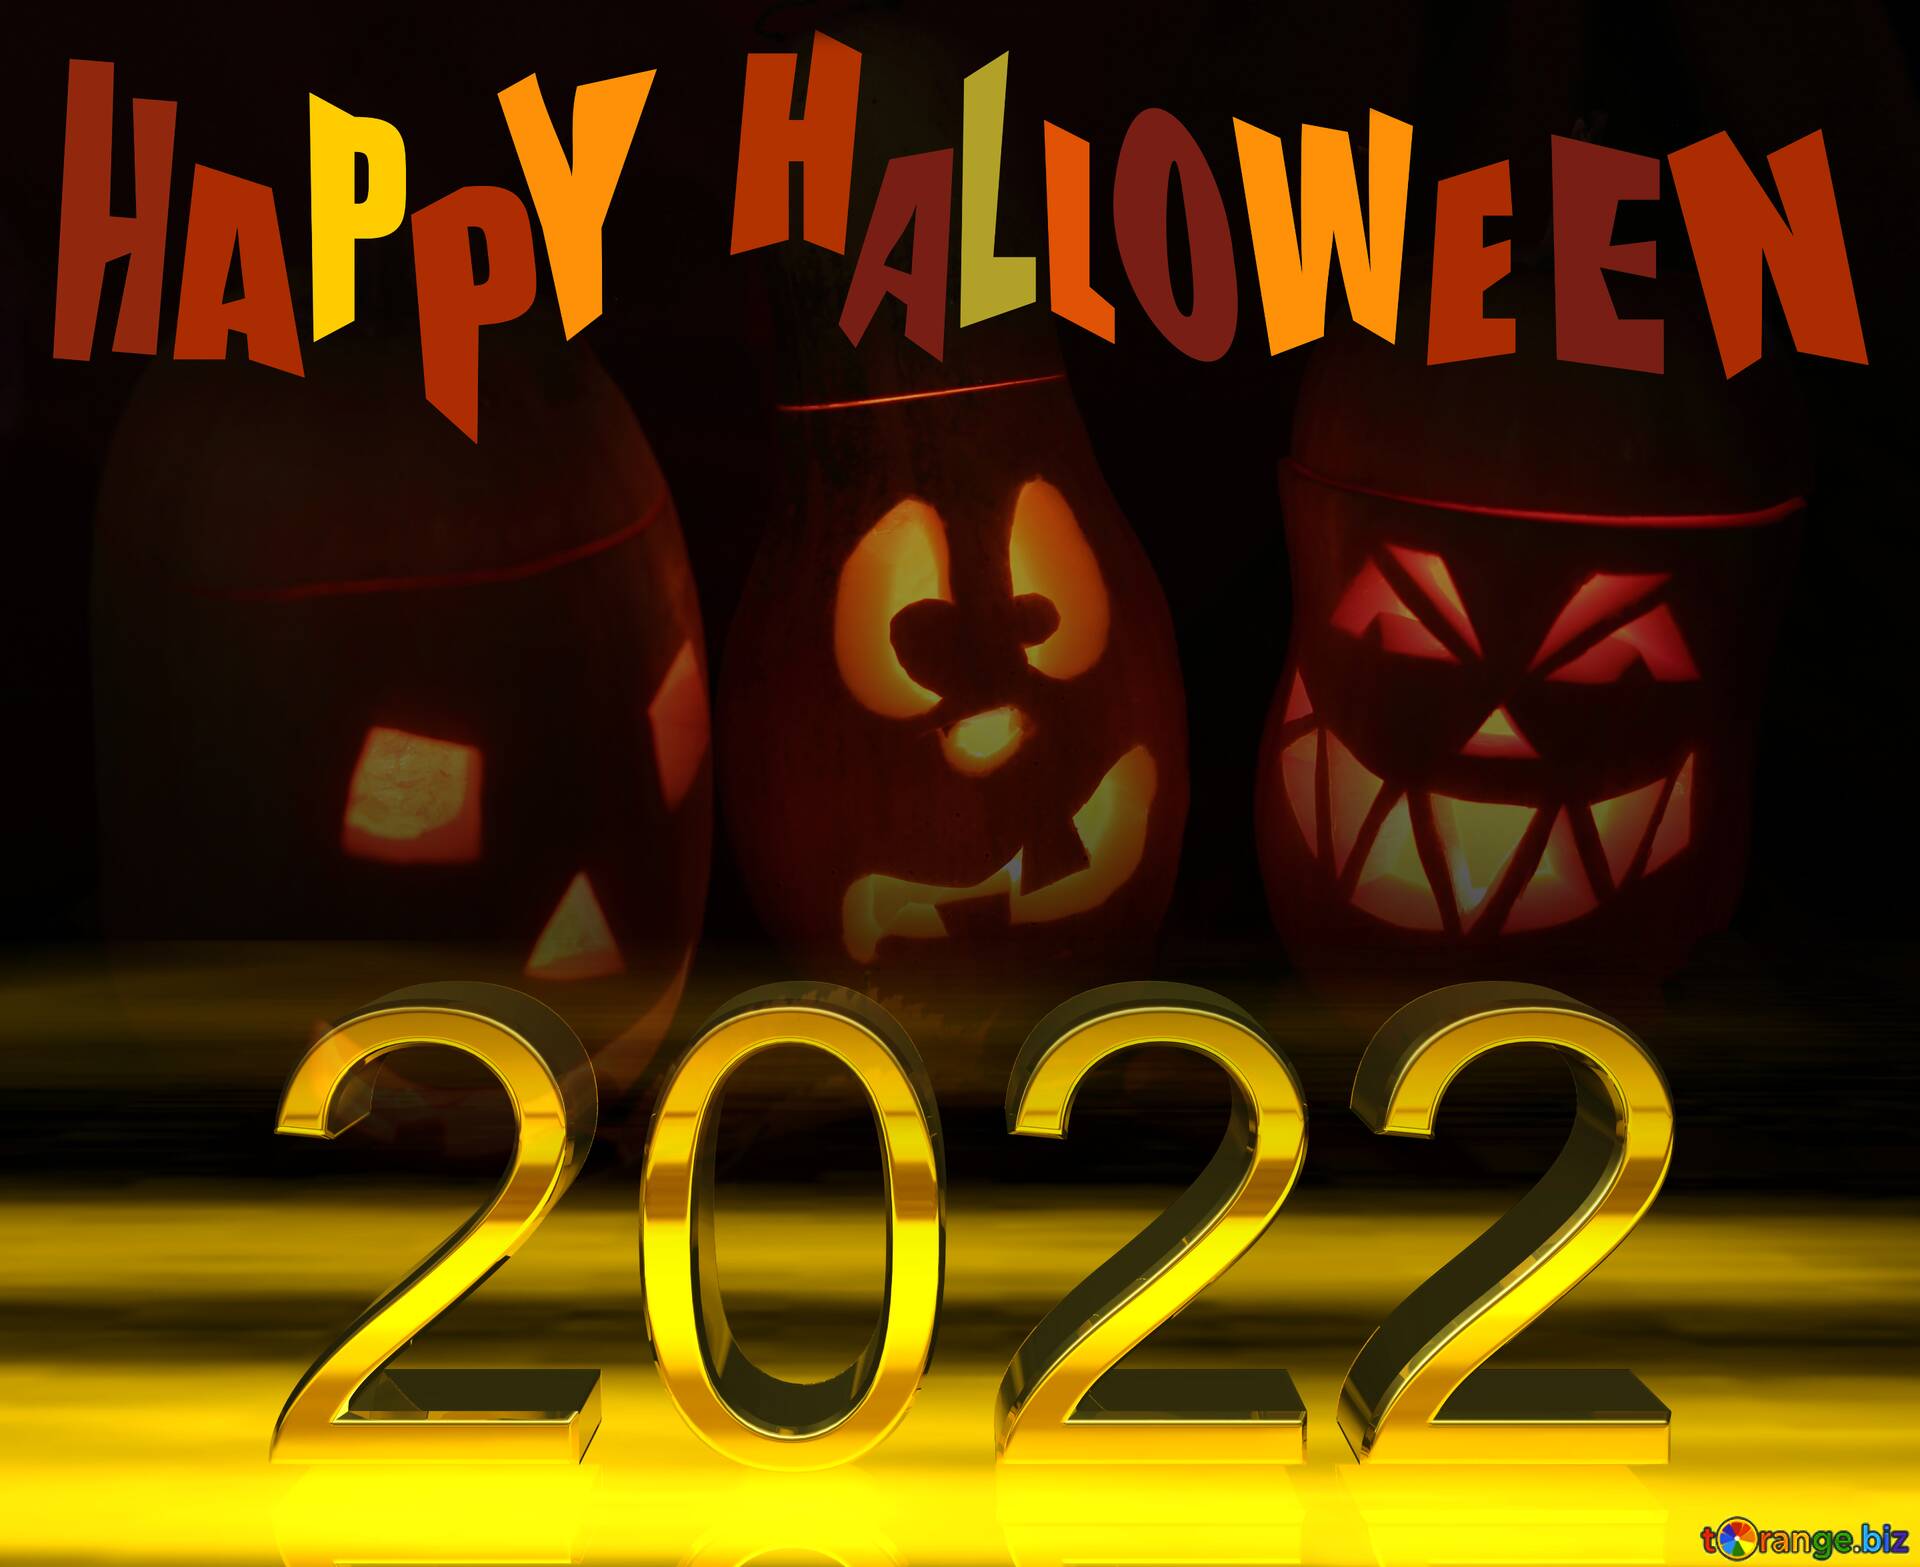 Download free picture pumpkins happy halloween d digits on cc